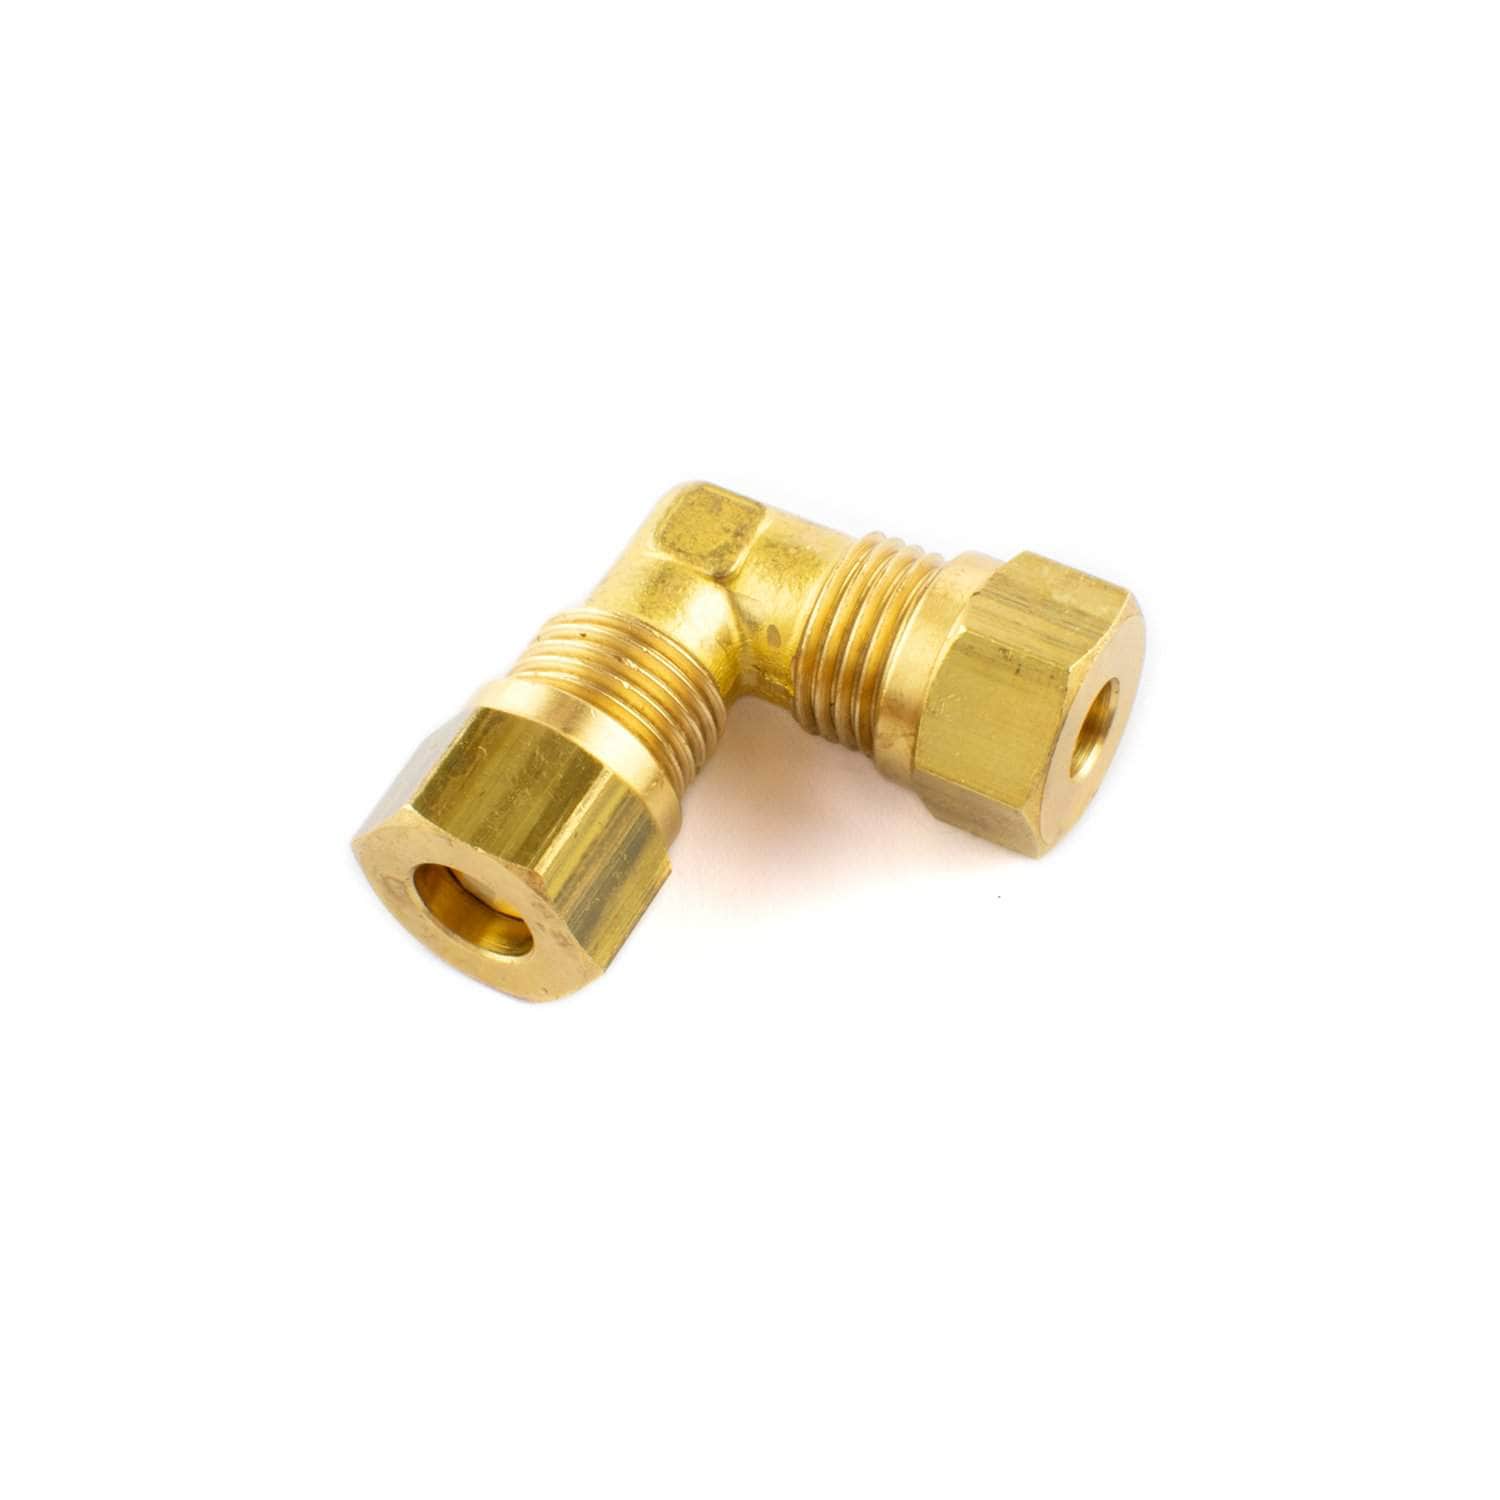 6mm to 8mm 90° compression elbow for use with oil Aga range cookers